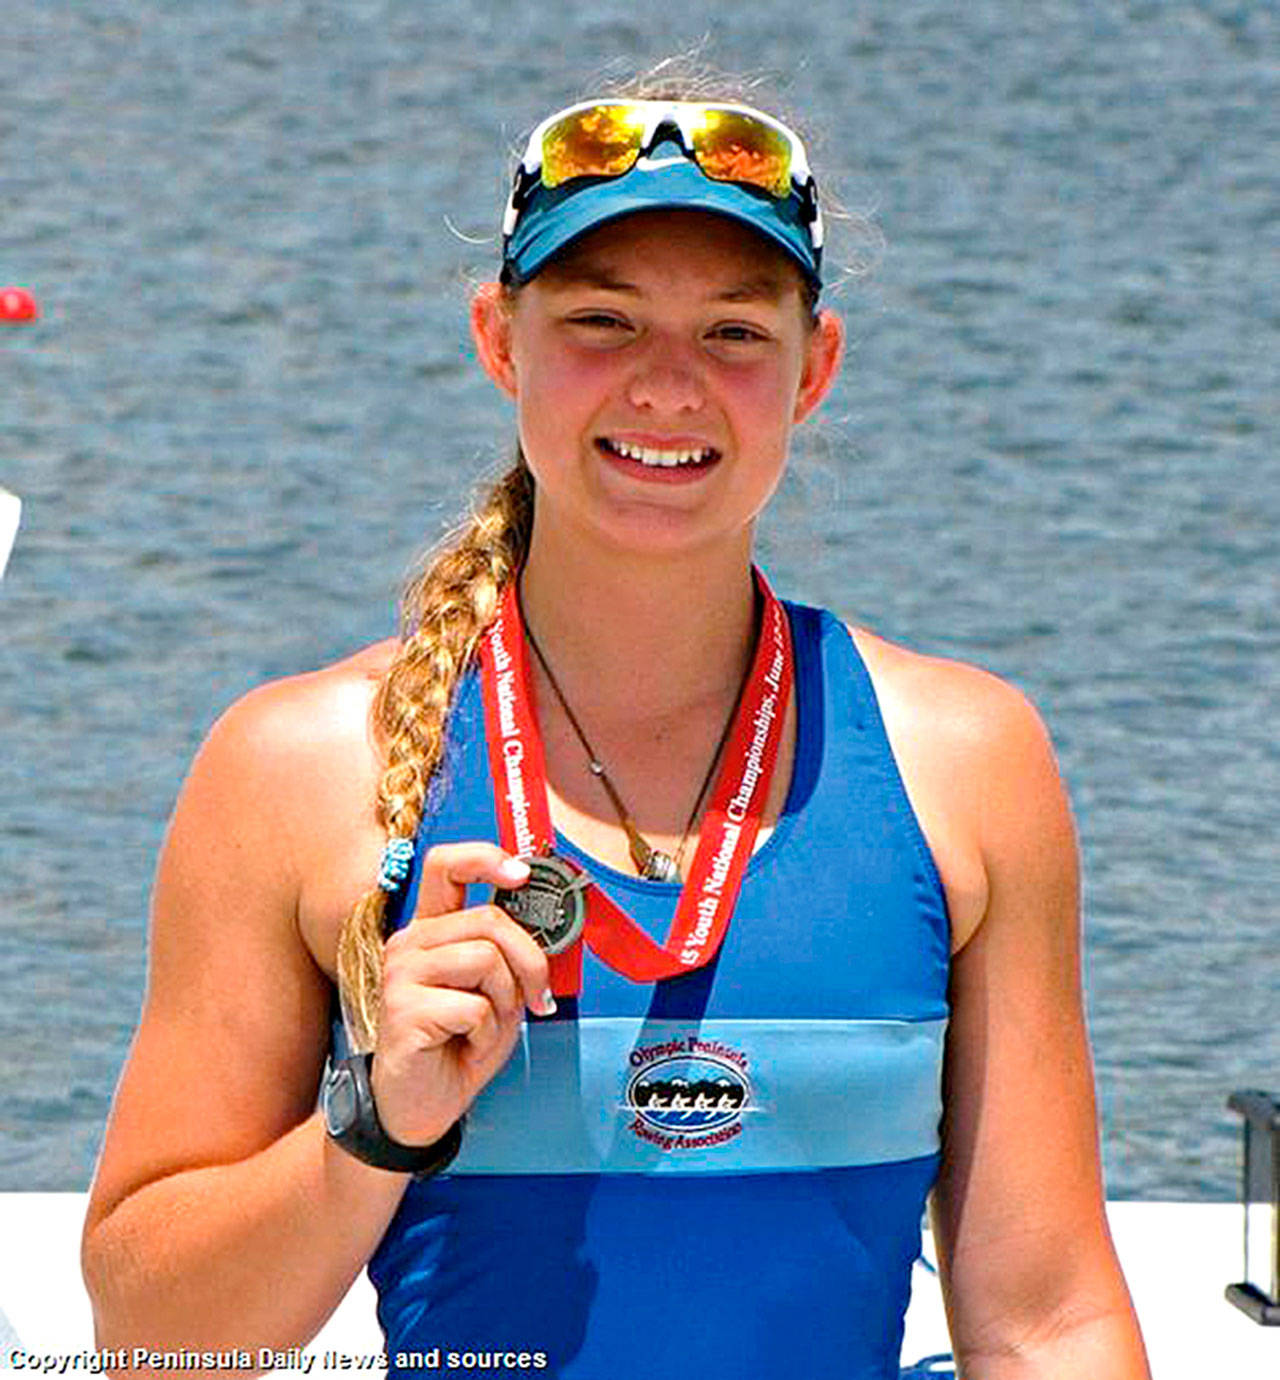 Elise Beuke as a Sequim senior with her silver medal at teh U.S. Rowing Junior National Championship. (Mary Beth Beuke)